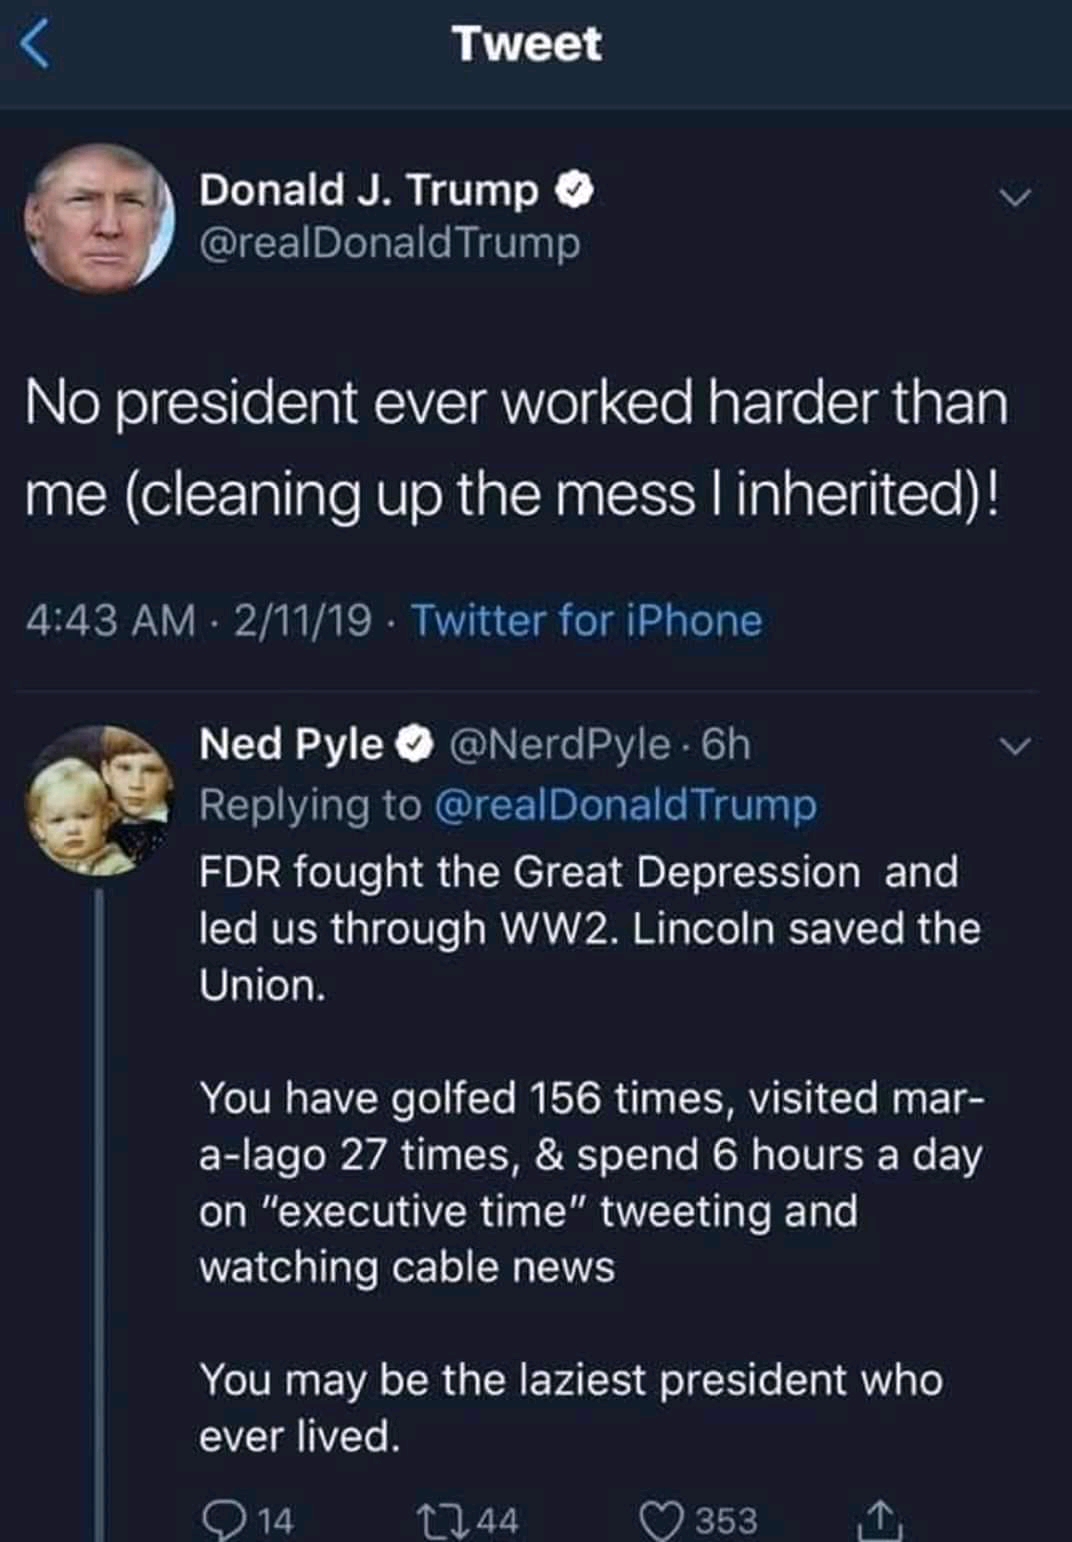 screenshot - Tweet Donald J. Trump Trump No president ever worked harder than me cleaning up the mess I inherited! 21119 Twitter for iPhone Ned Pyle . 6h Trump Fdr fought the Great Depression and led us through WW2. Lincoln saved the Union. You have golfe